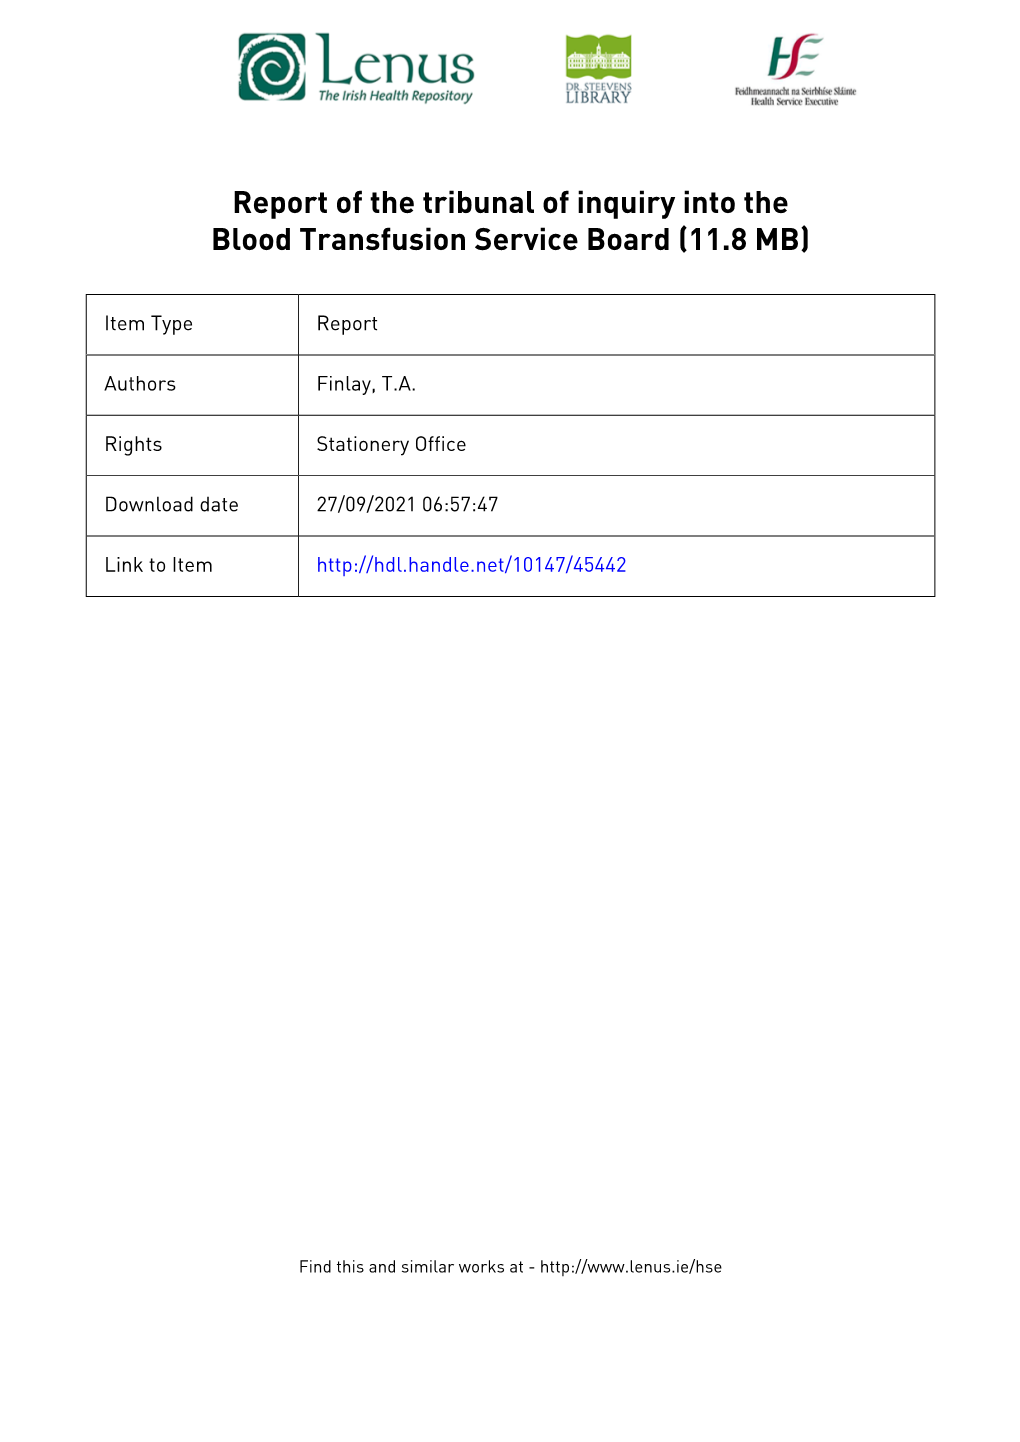 Tribunal of Inquiry the Blood Transfusion Service Board